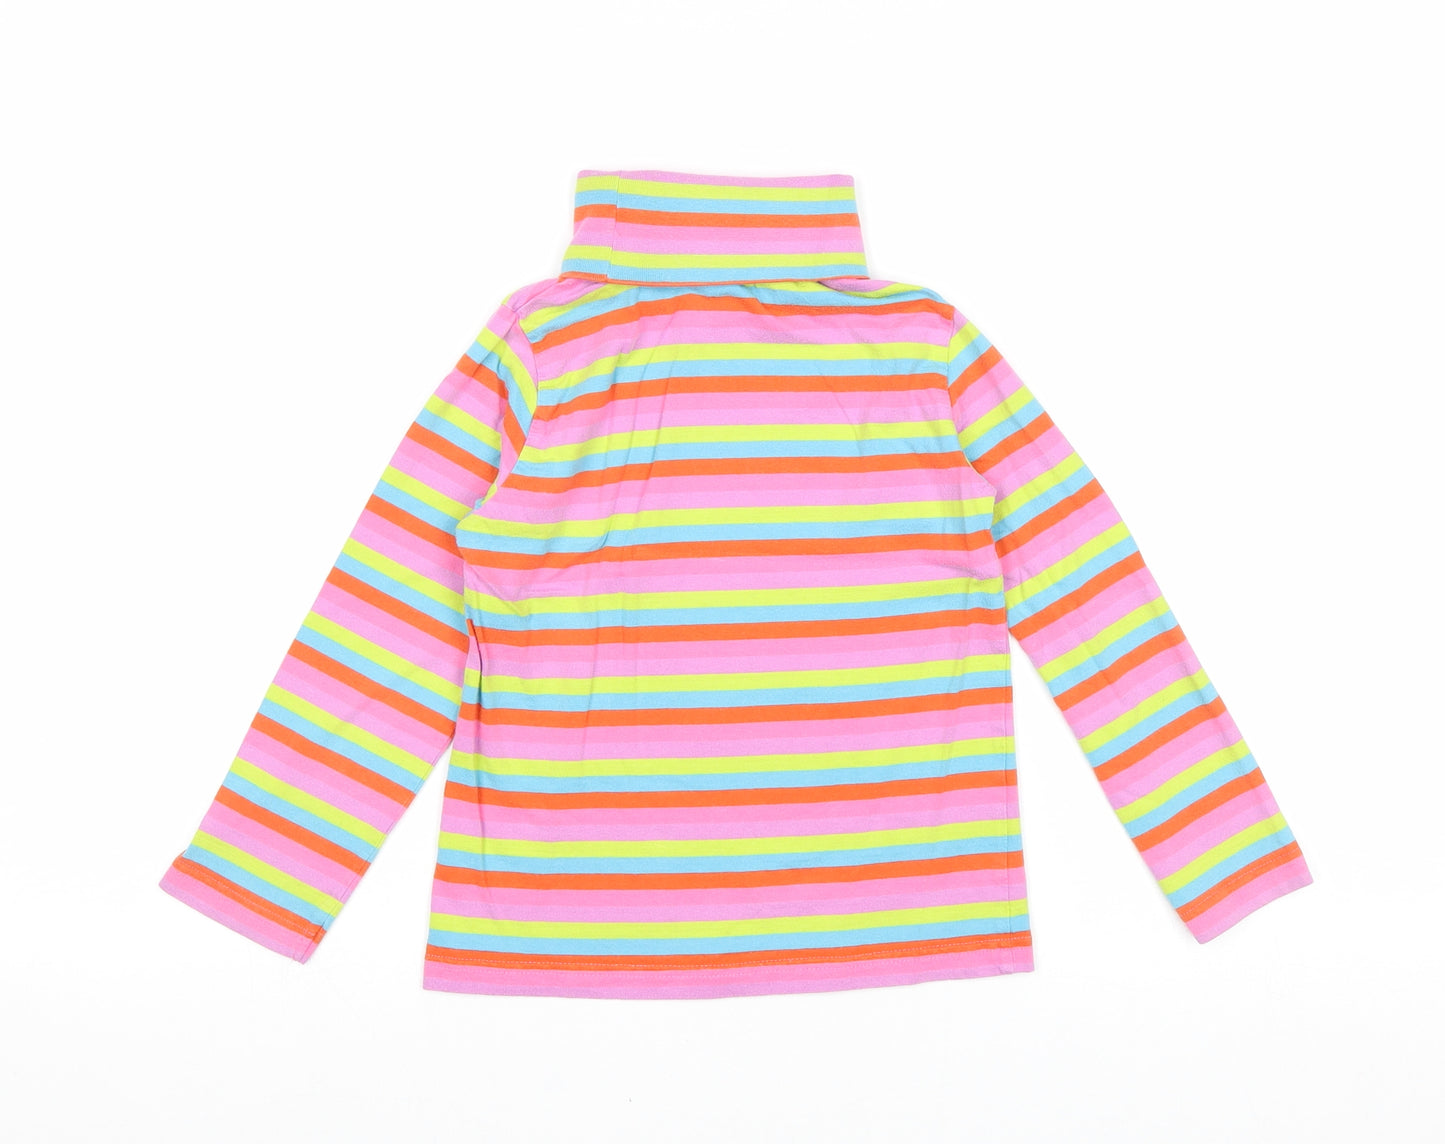 Blue Zoo Girls Multicoloured Striped 100% Cotton Basic T-Shirt Size 5-6 Years Roll Neck Pullover